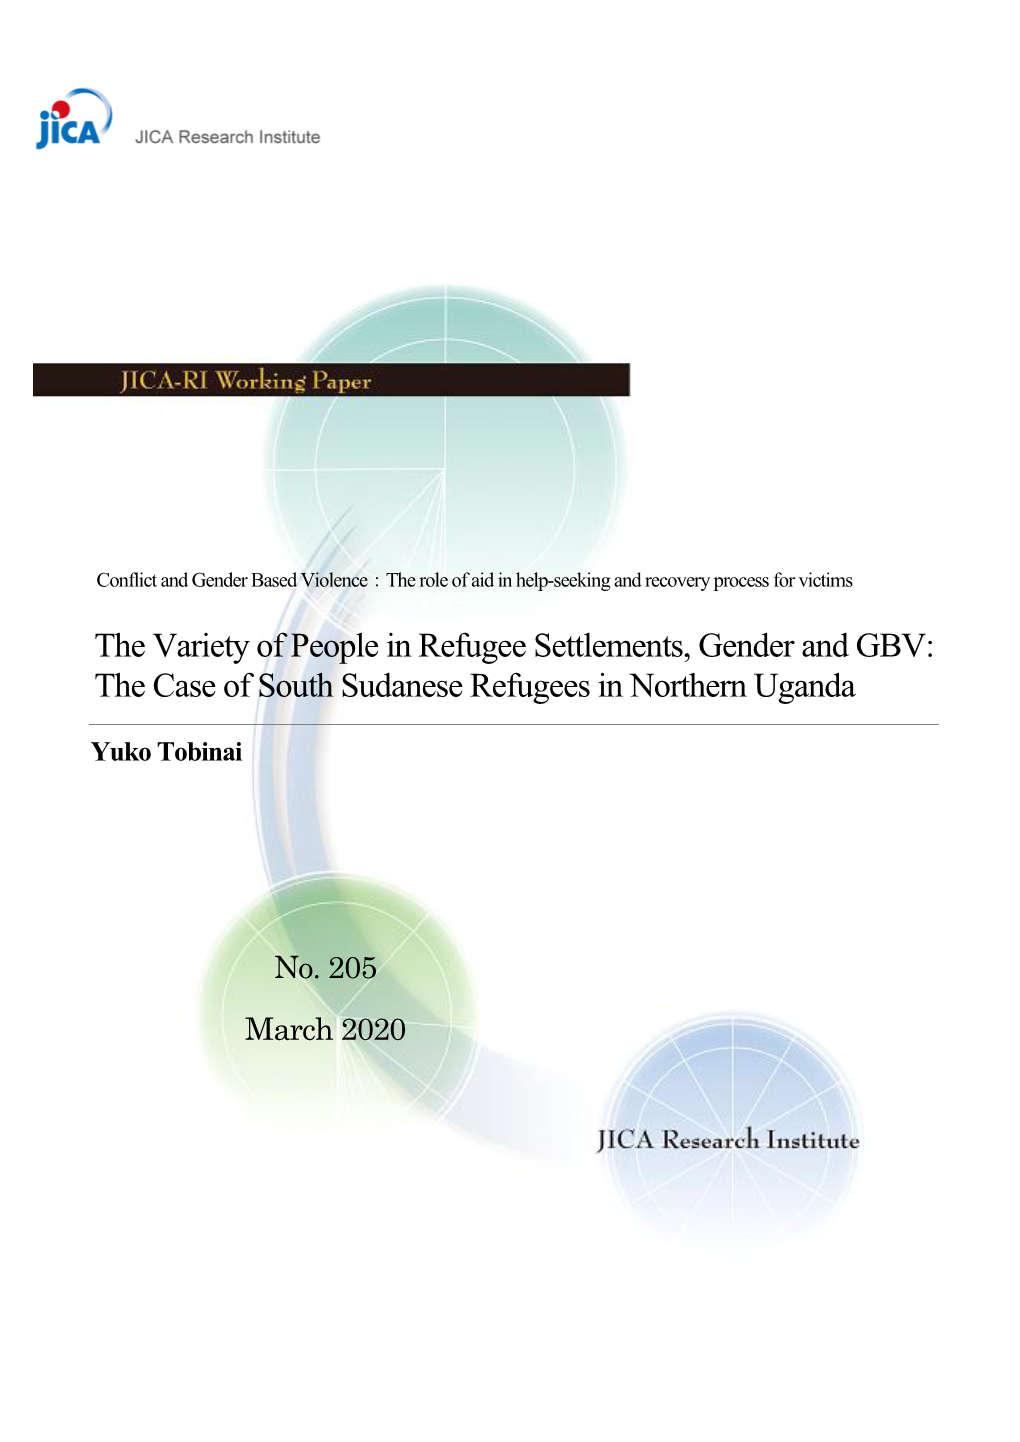 The Case of South Sudanese Refugees in Northern Uganda